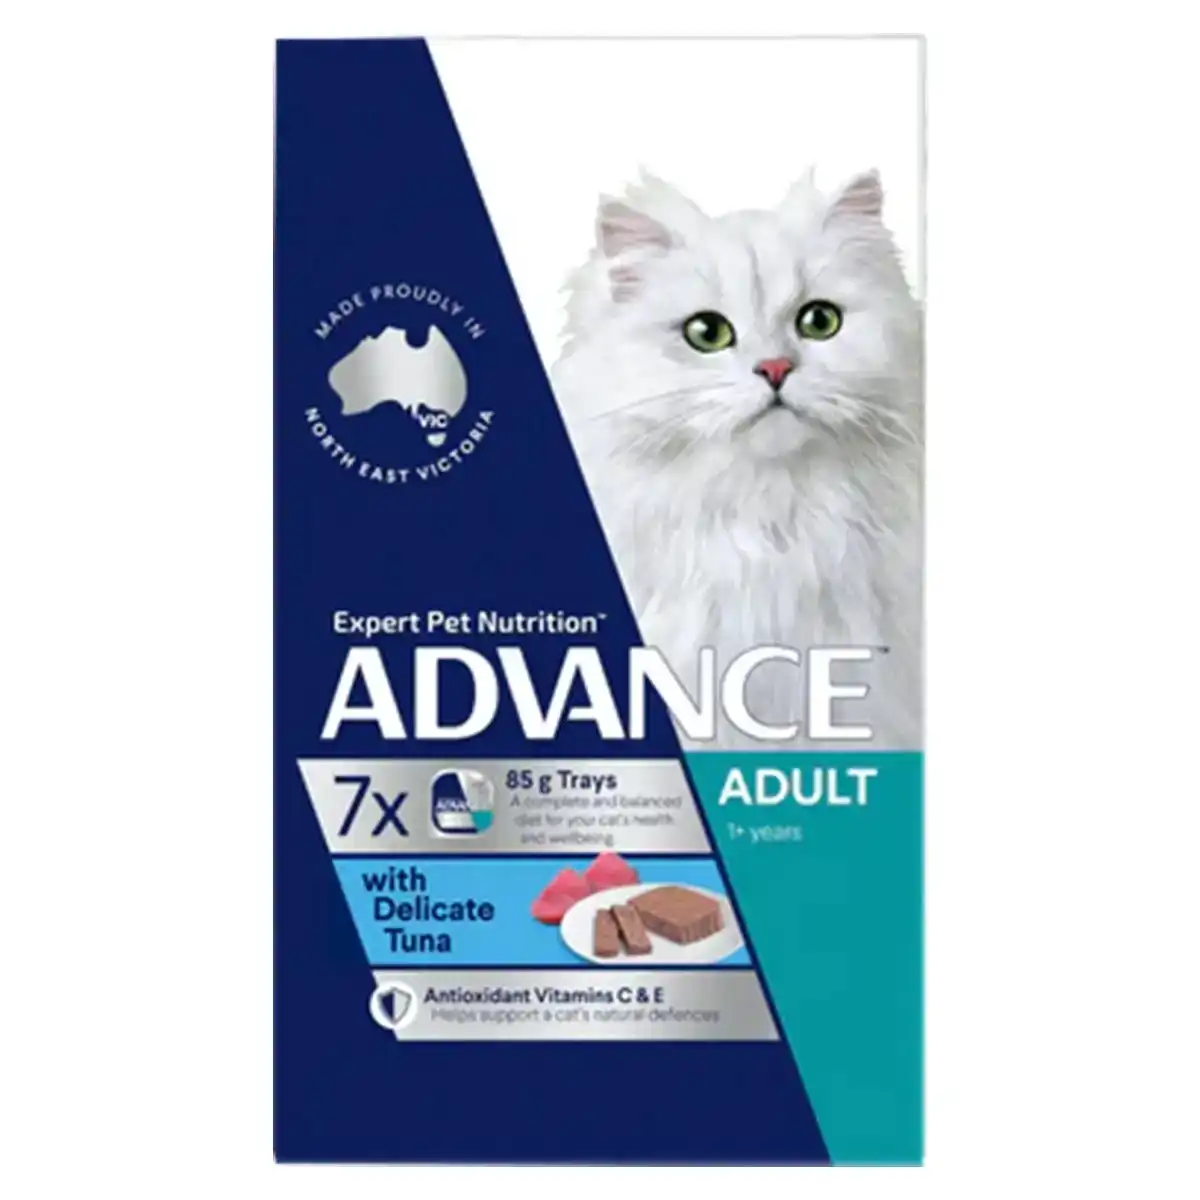 ADVANCE Adult with Delicate Tuna Trays Wet Cat Food (85G*7) 1 Pack